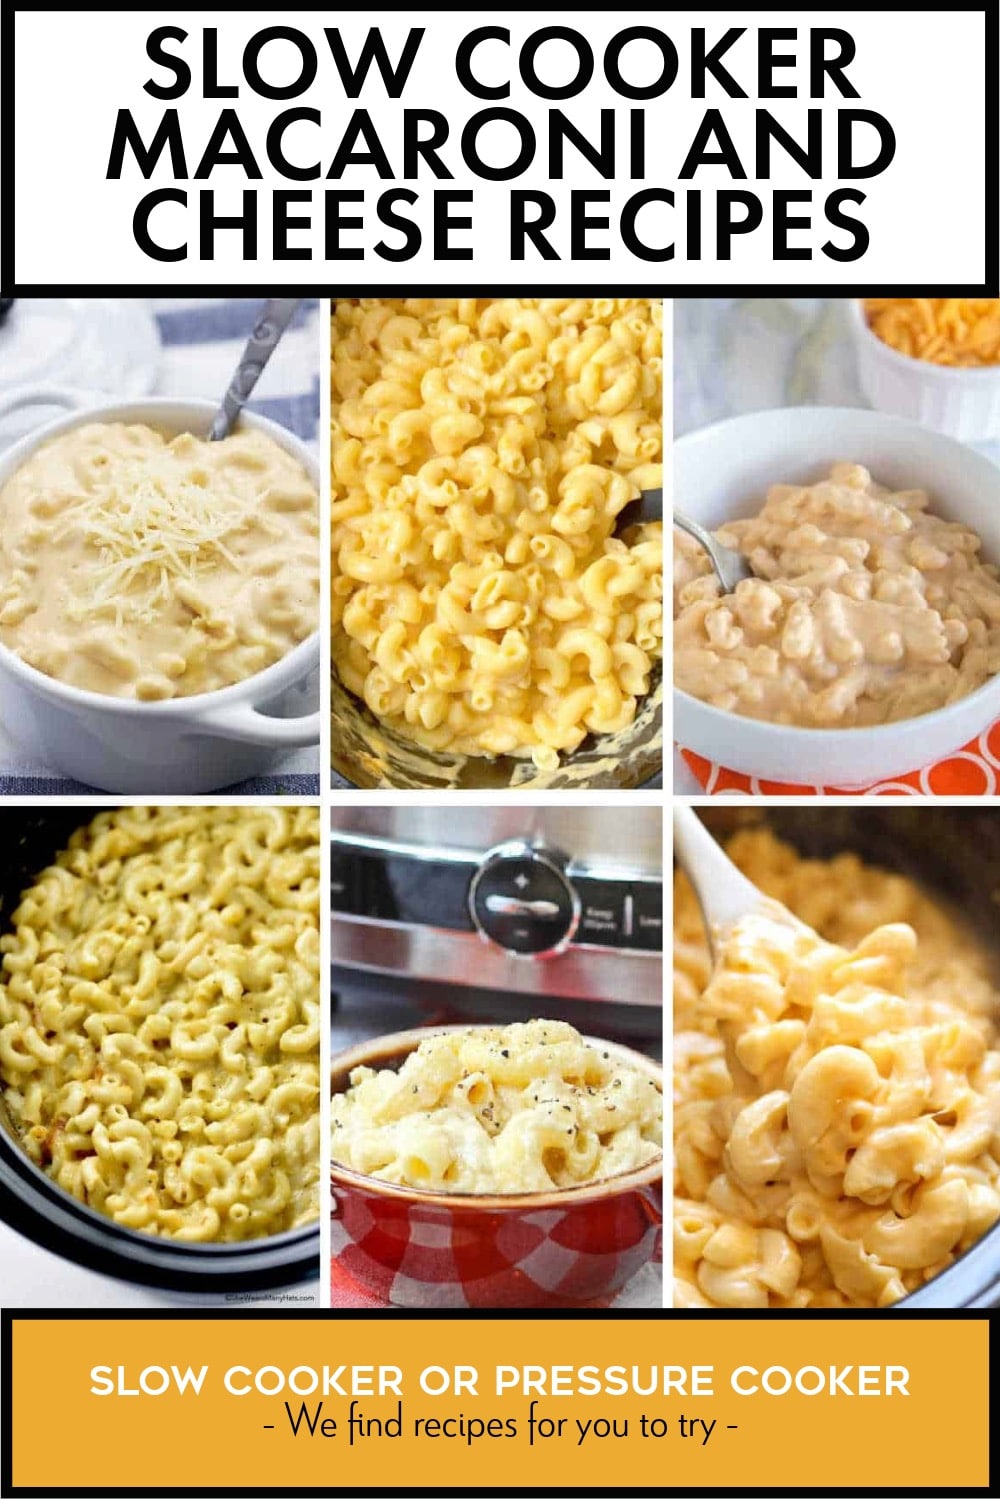 Pinterest image of Slow Cooker Macaroni and Cheese Recipes